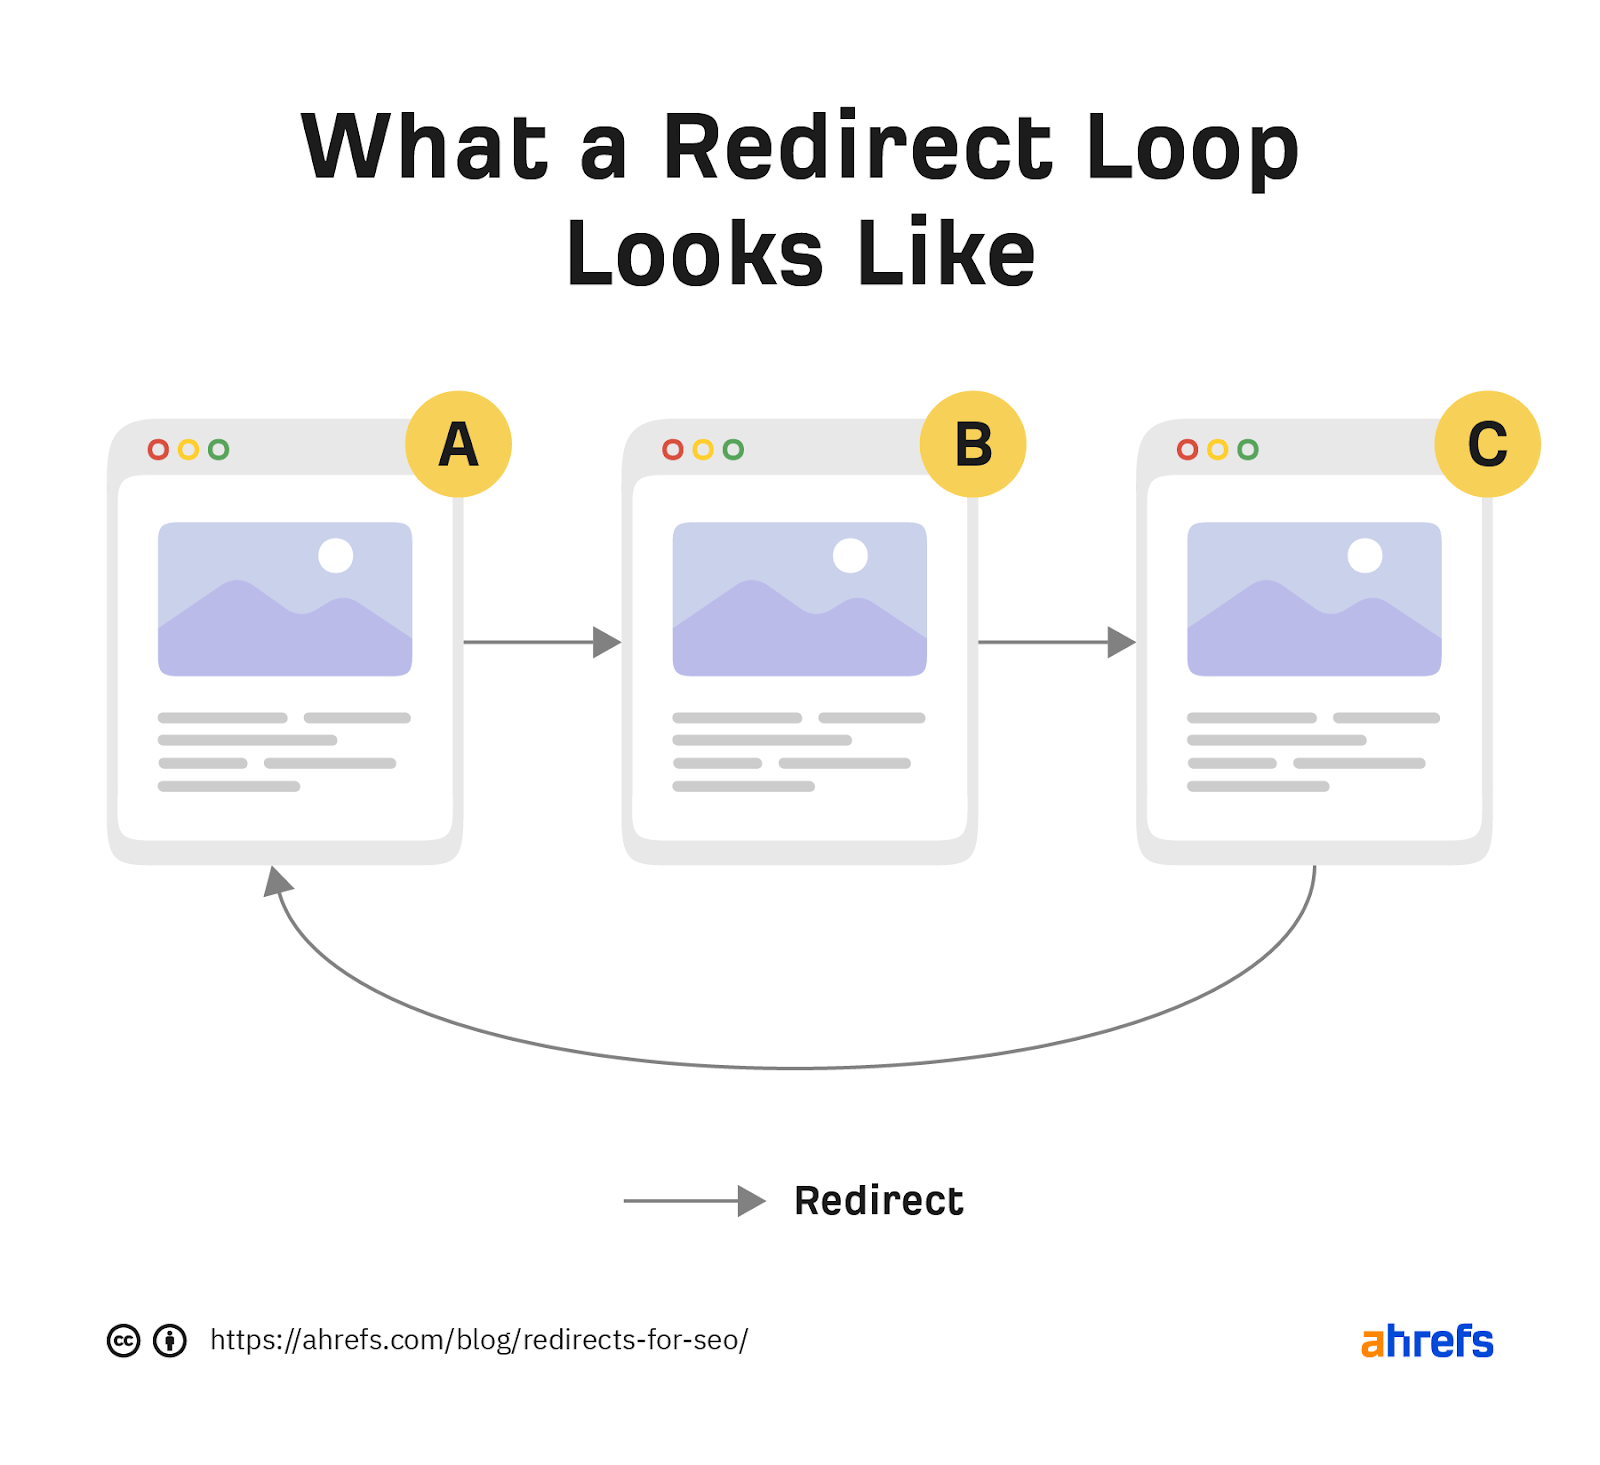 What a redirect loop looks like